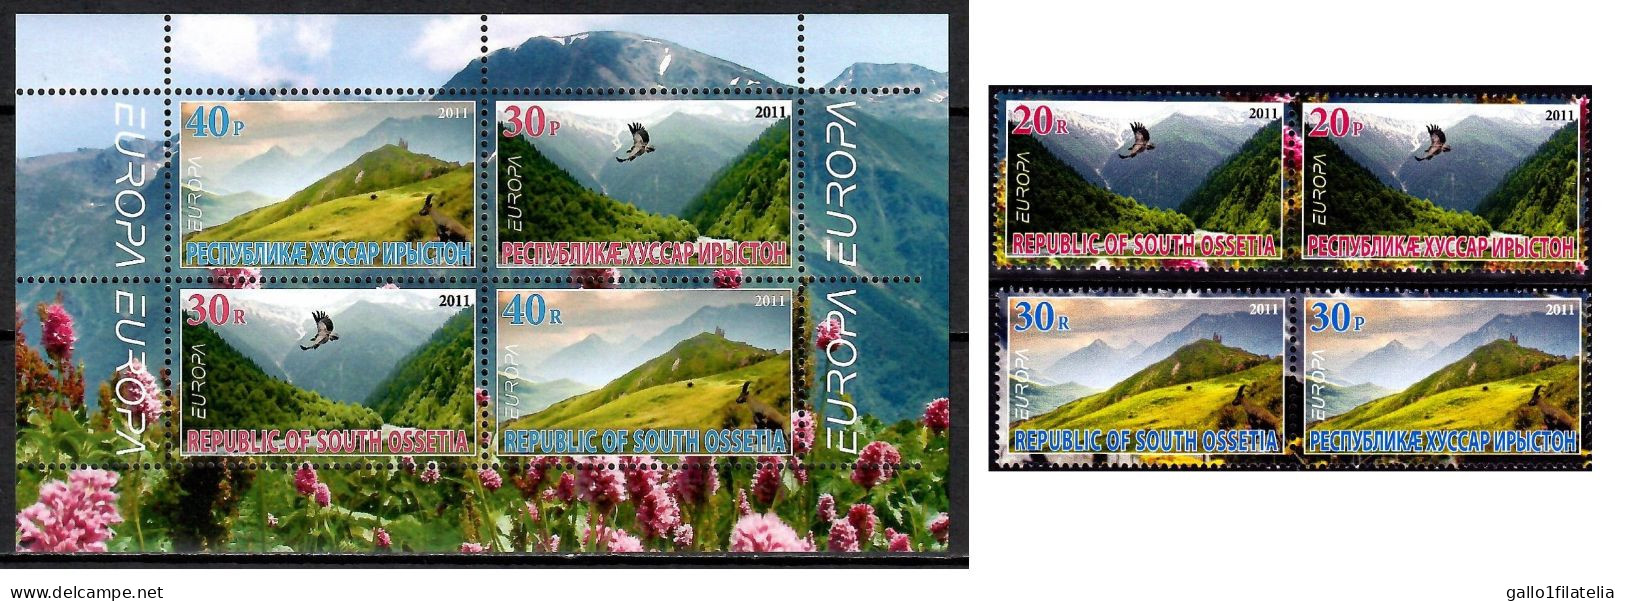 2011 - SUD OSSEZIA / SOUTH OSSETIA - EUROPA CEPT - LE FORESTE / THE FORESTS. MNH - 2011